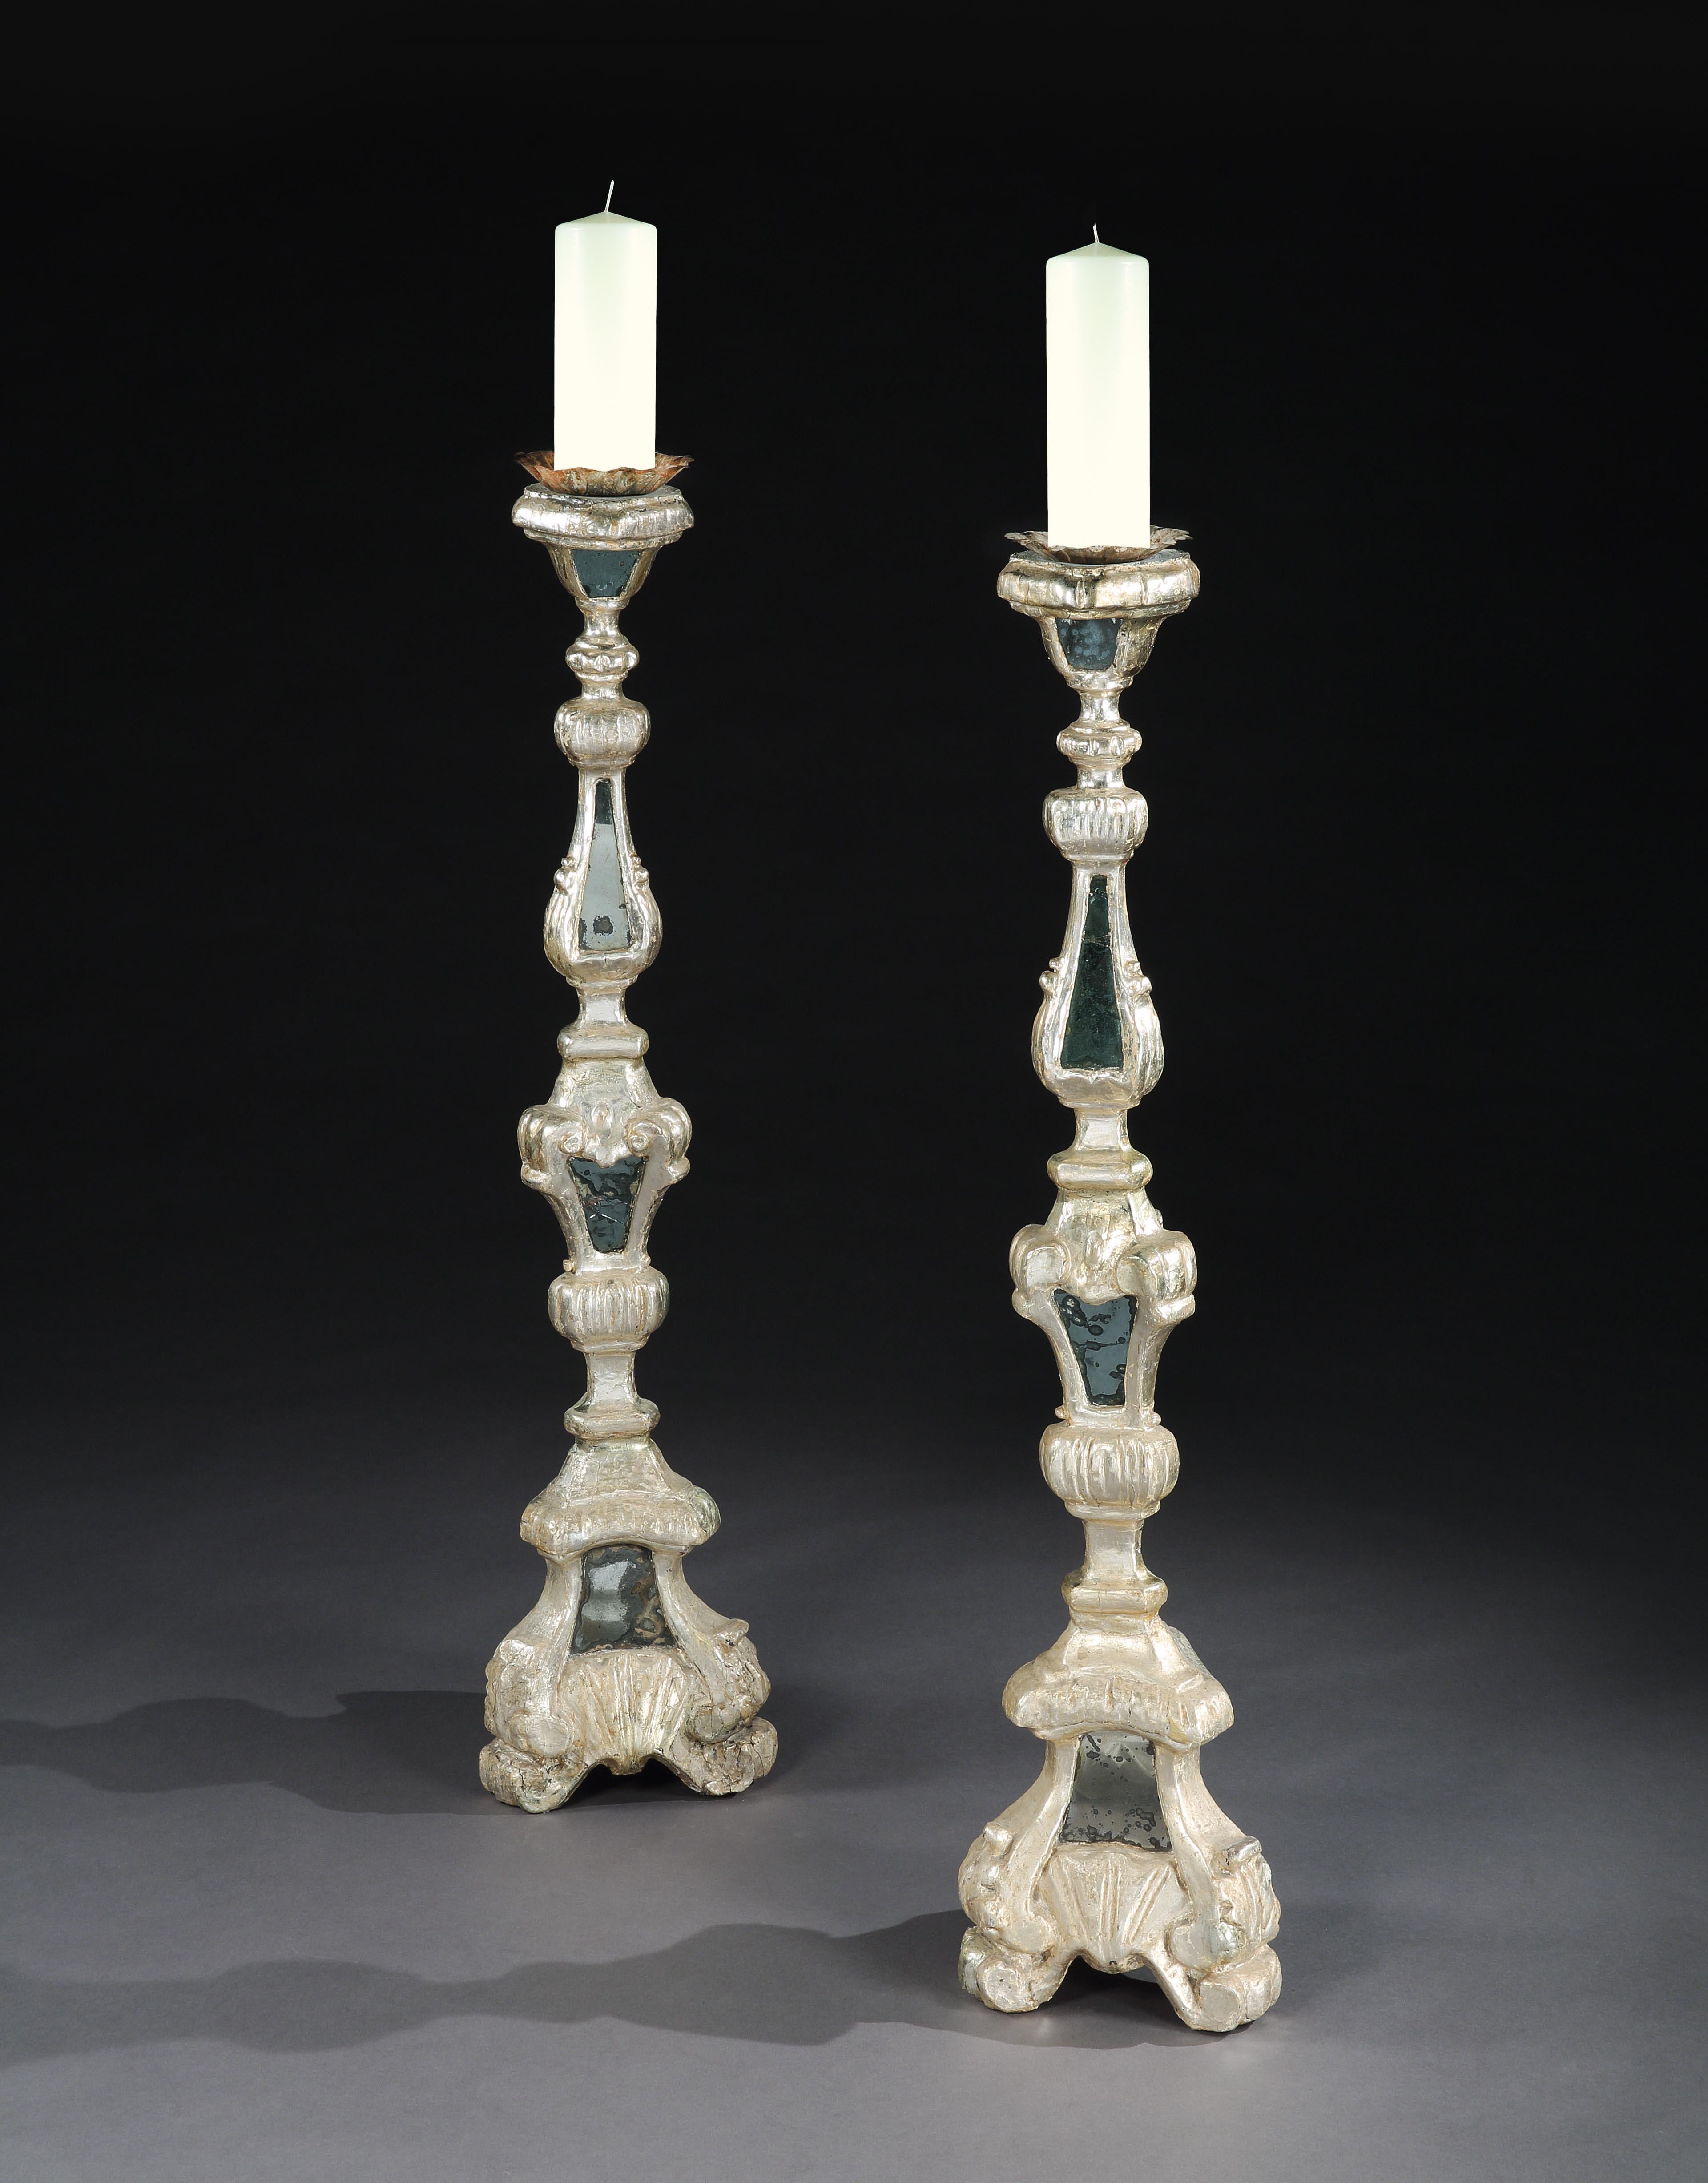 Torcheres Candlestands Pair Silver-Gilt Mirror Plate Italian Rococo 62